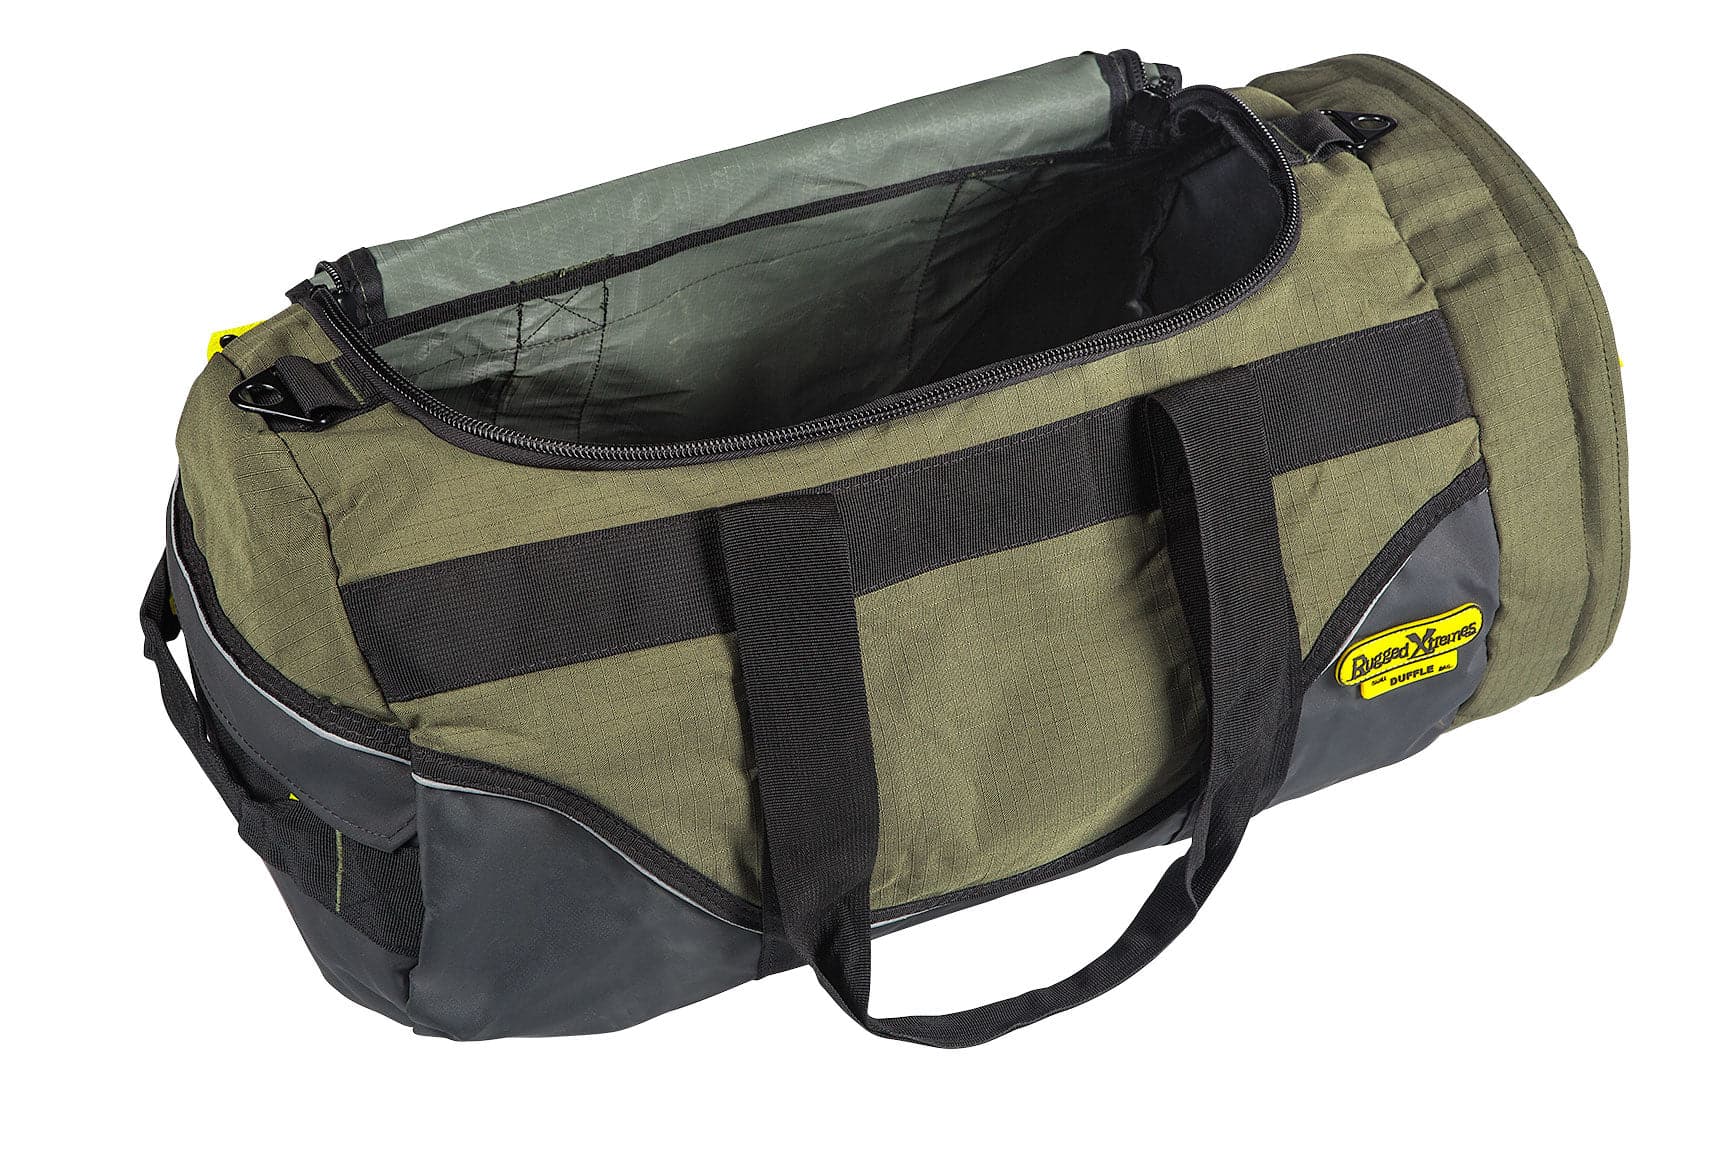 Retrospective® 50 Duffel Bag for travel, sports, and adventure – Think Tank  Photo